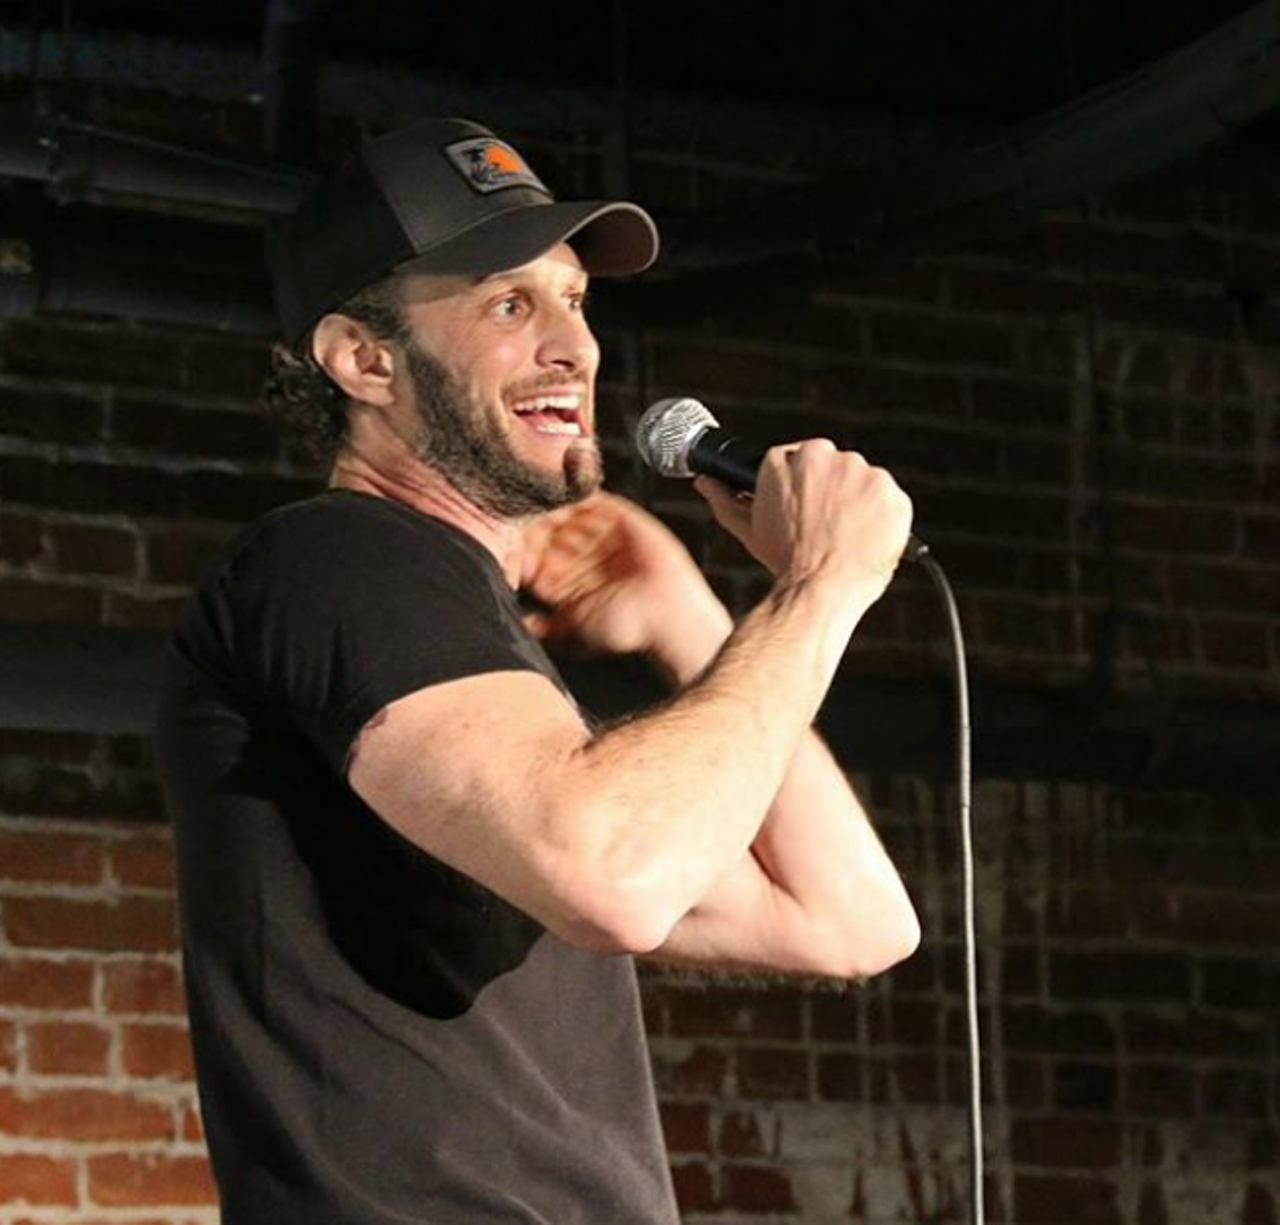 Josh Wolf
Comedian Josh Wolf may not come across as the collegiate type, but he totally spent some time studying here in San Antonio. Okay, we can’t confirm that, but it is in fact true that the funnyman graduated from Trinity University. His work as an actor, comedian and writer must have resulted in him not suffering from any debt due to the prestigious university.
Photo via Instagram / https://www.instagram.com/p/BubnwpRngxM/